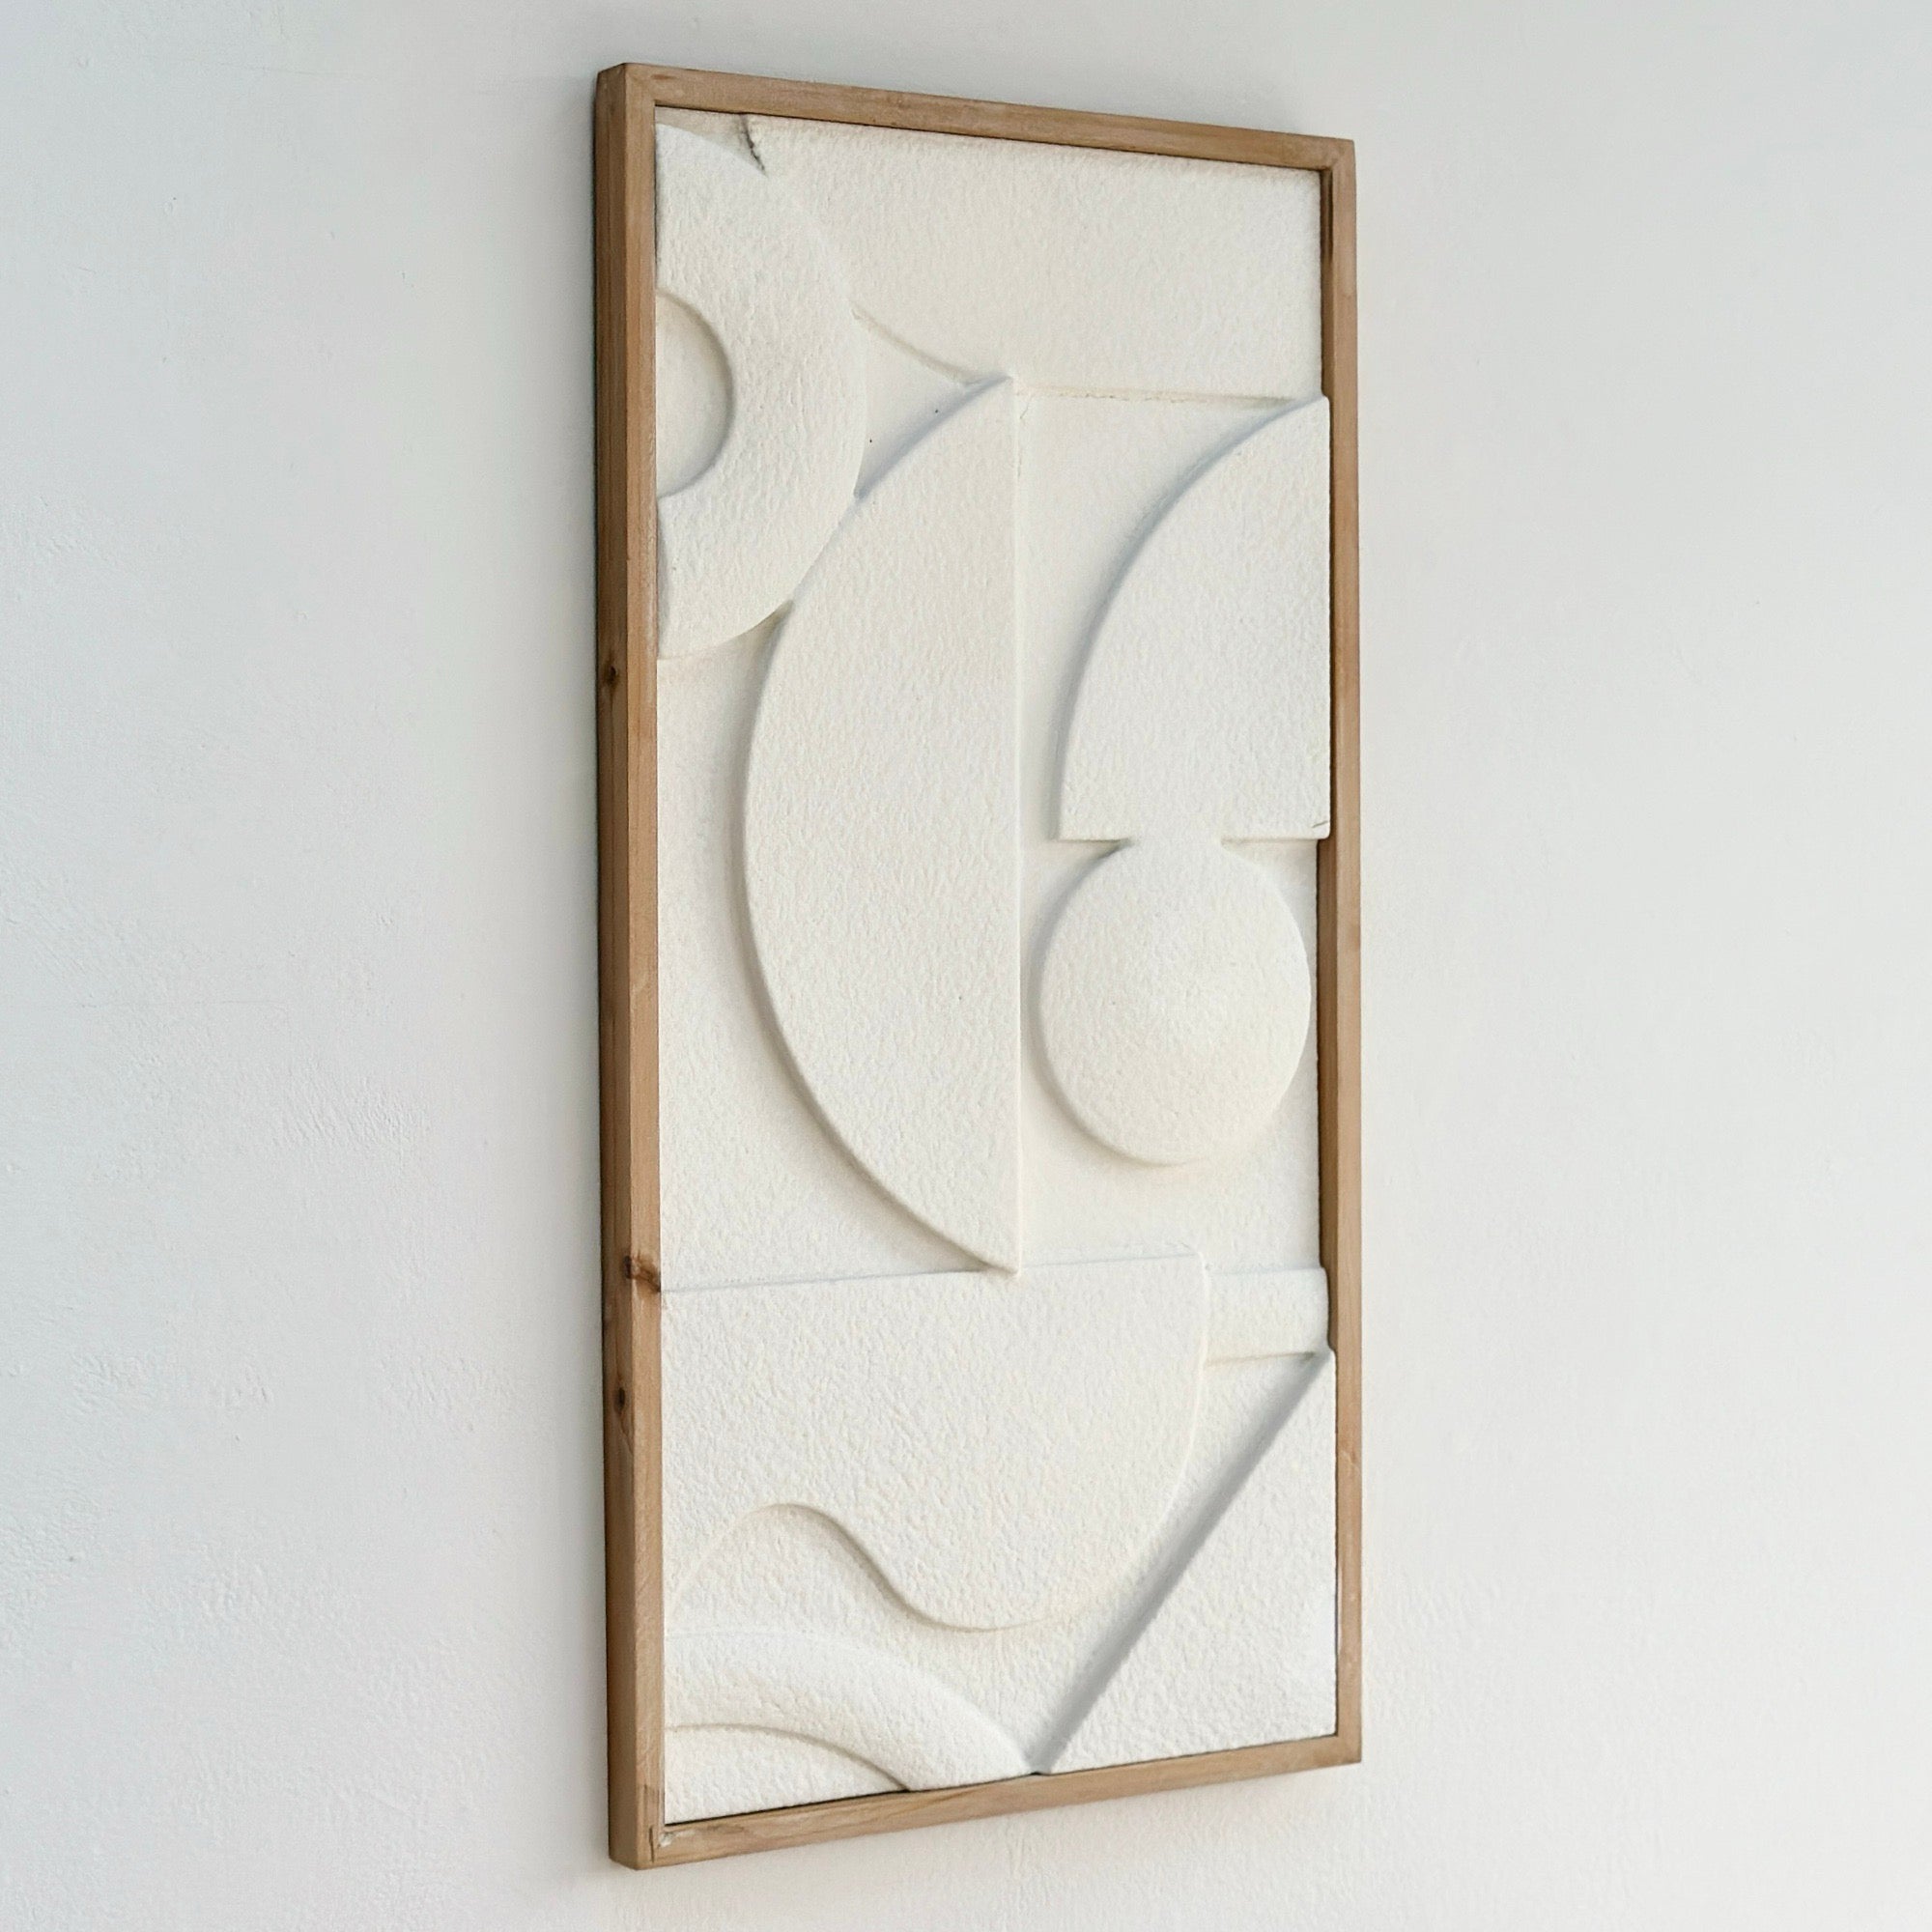 Dimensional Abstract White Wooden Frame Wall Art